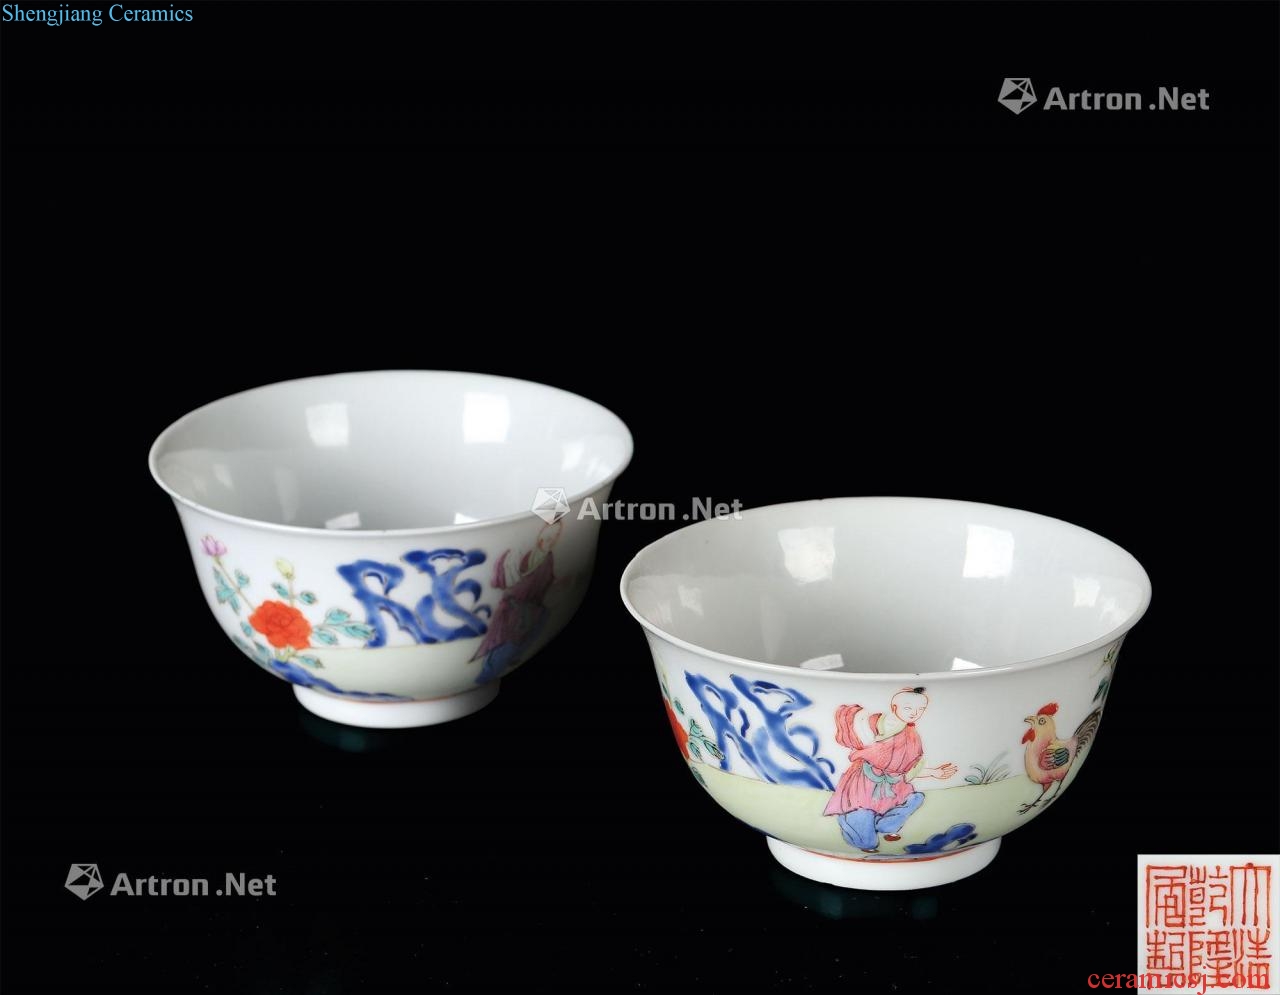 Royal pastel to poems in the qing dynasty bowl (a)